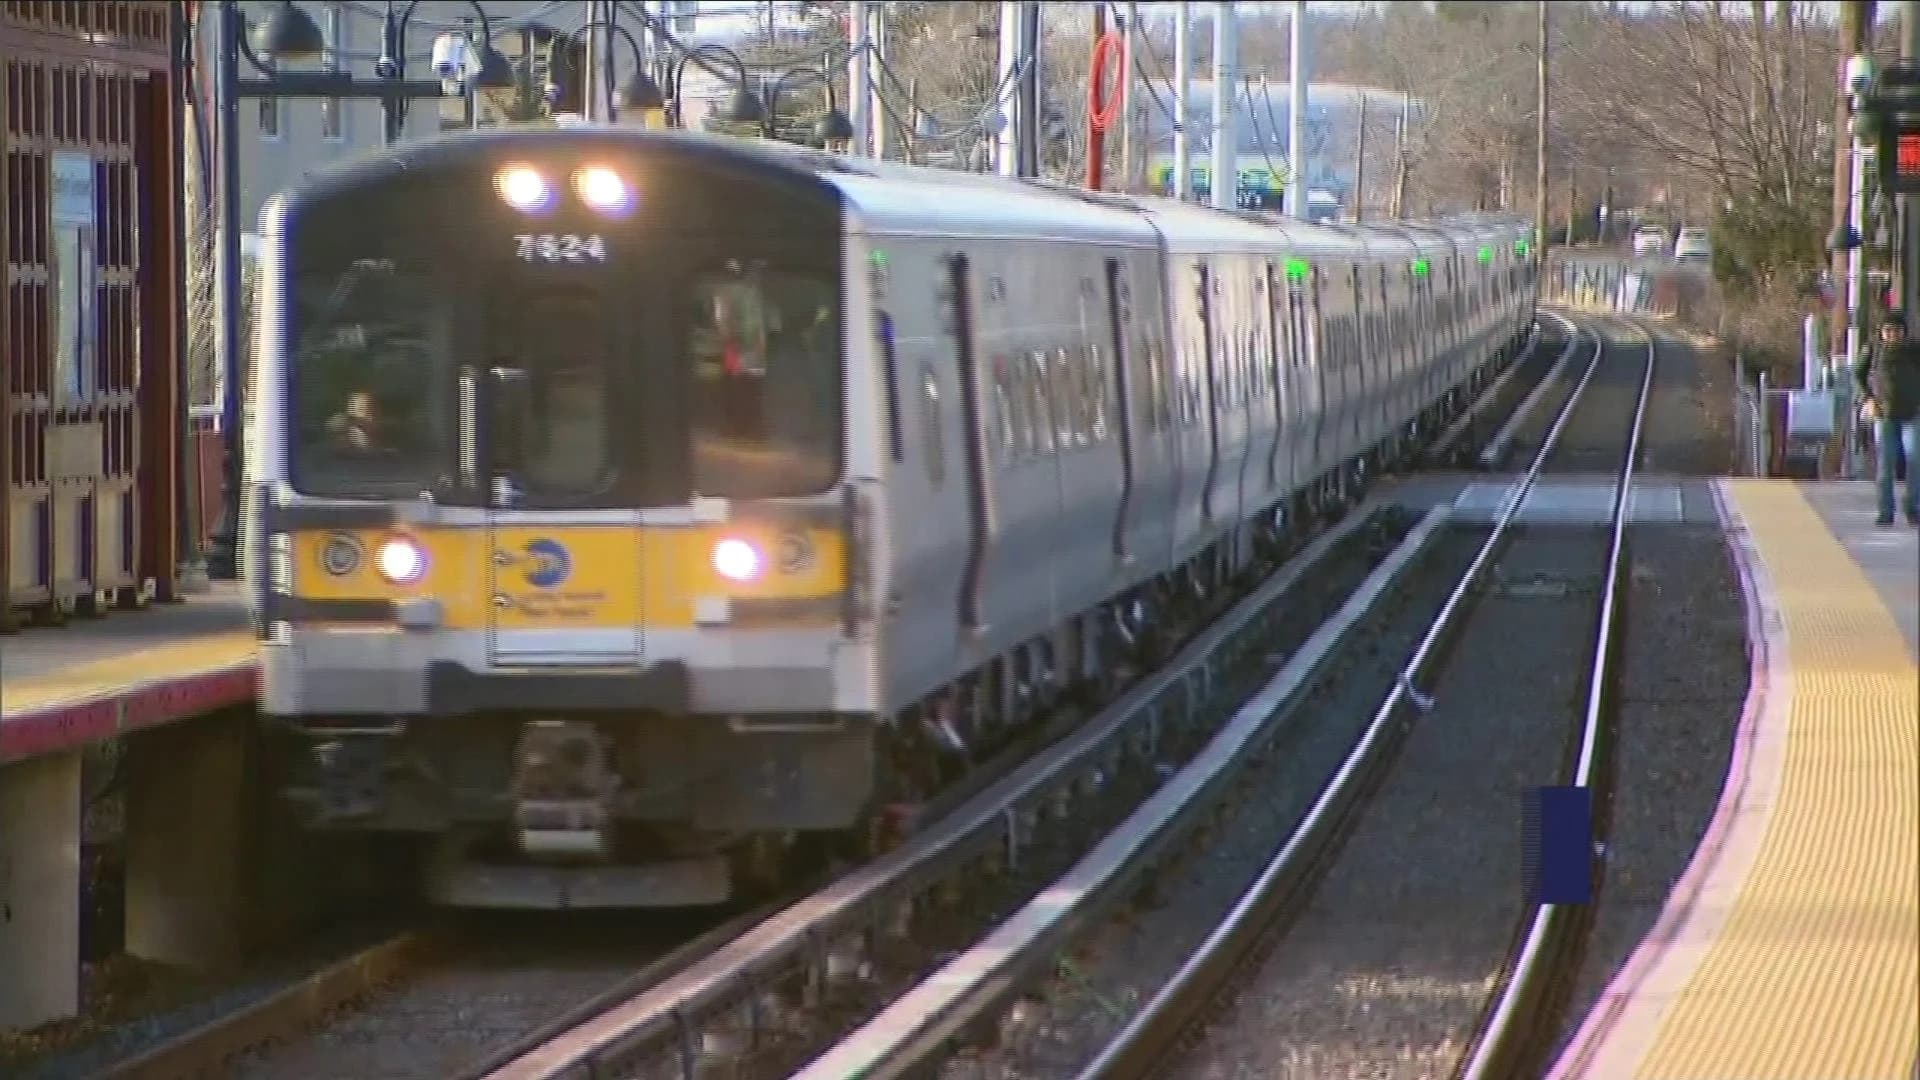 LIRR operating on or close to schedule after service disruptions